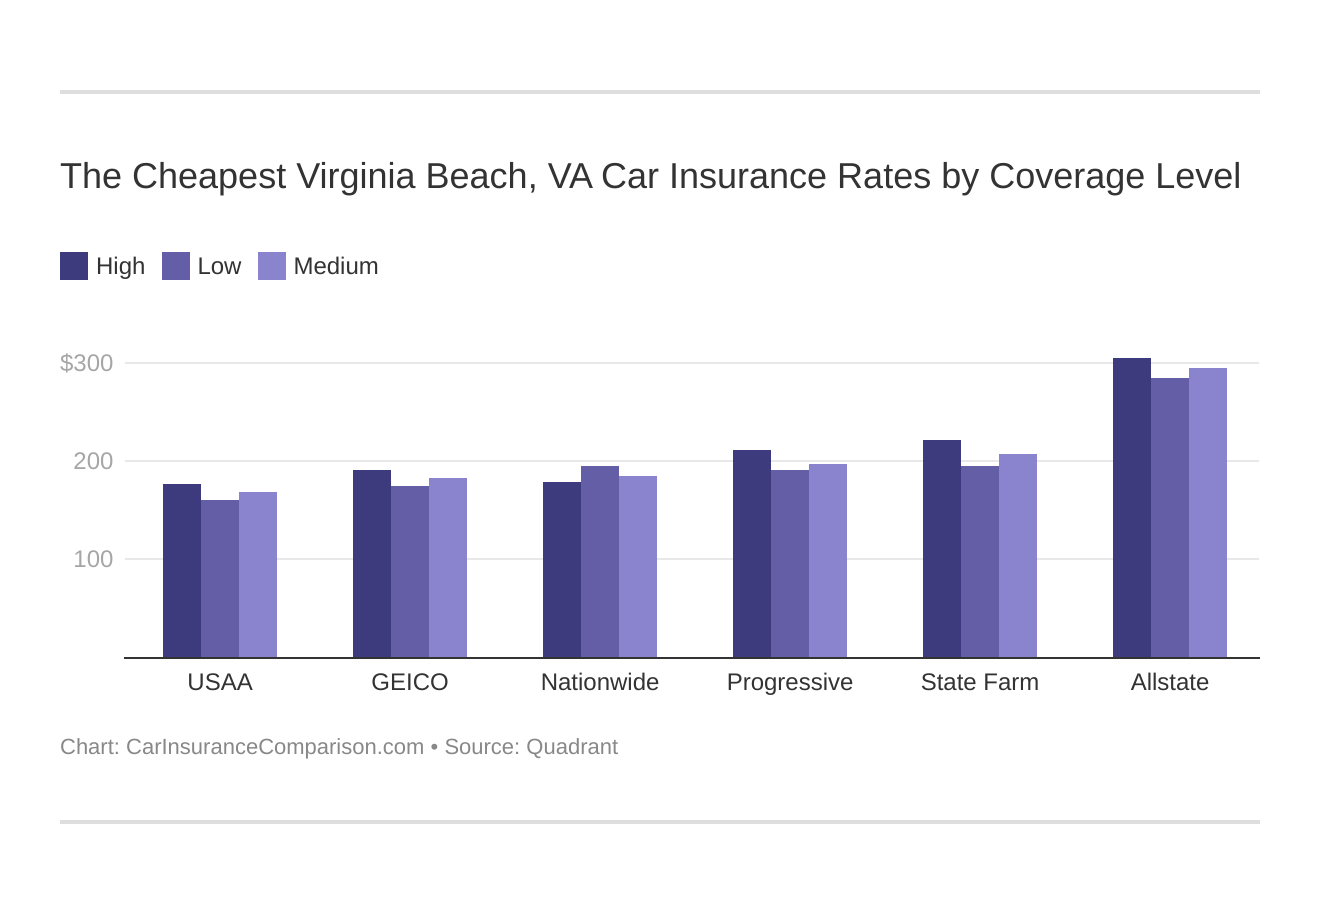 The Cheapest Virginia Beach, VA Car Insurance Rates by Coverage Level